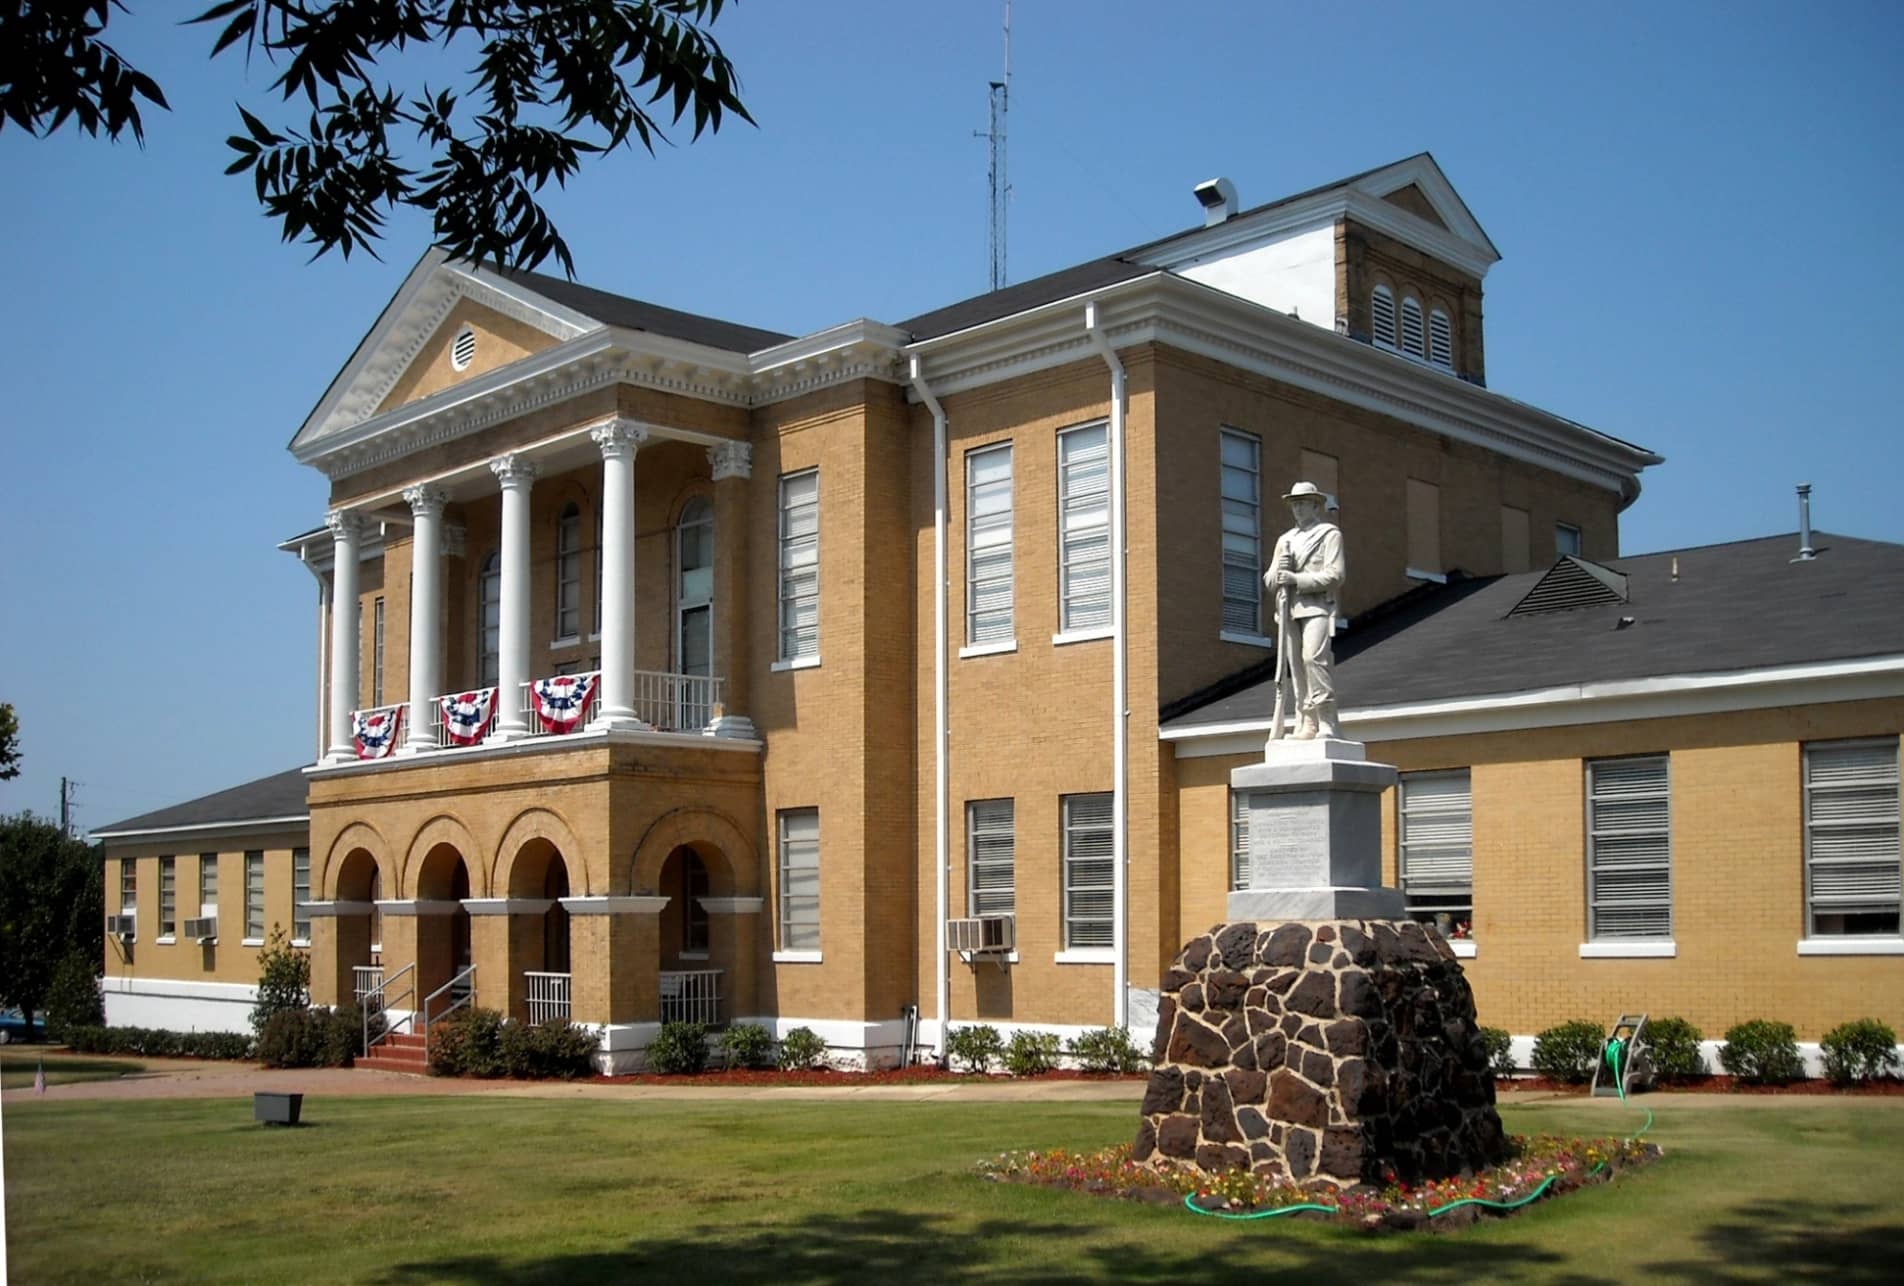 Image of Choctaw County Revenue Commissioner Choctaw County Courthouse